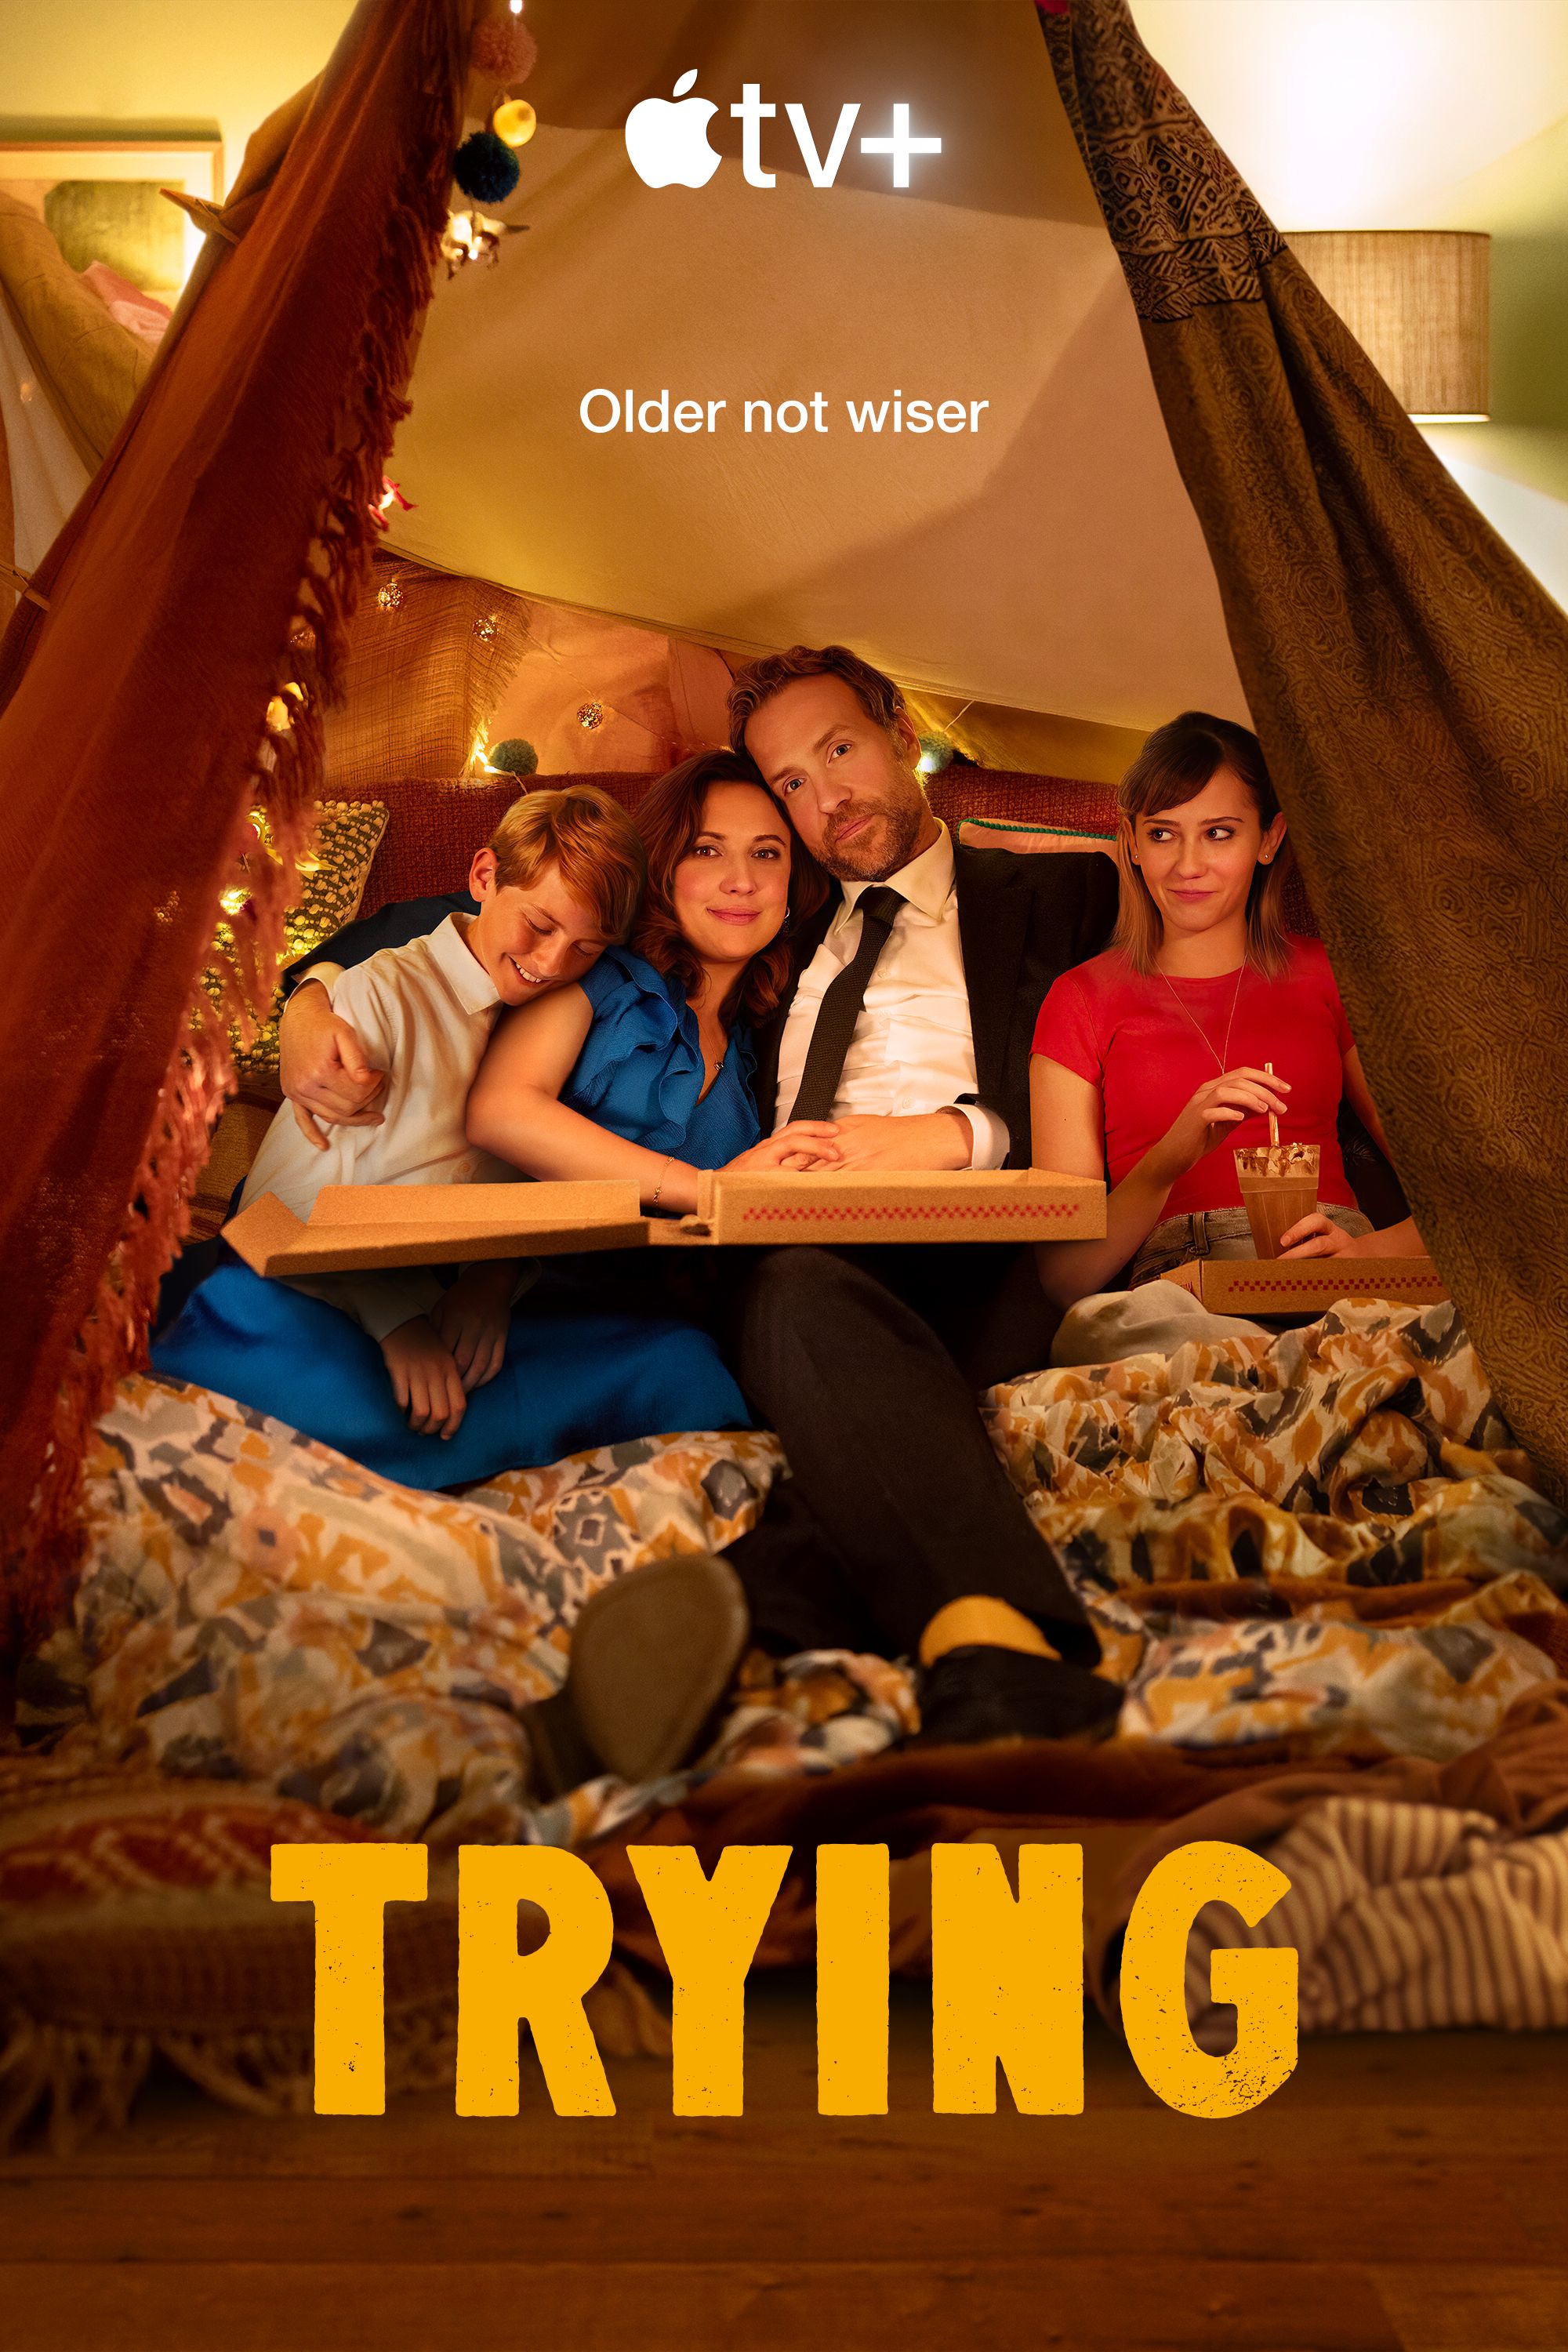 Rafe Spall and Esther Smith surrounded by two children in a tent for a promotional still for Trying.